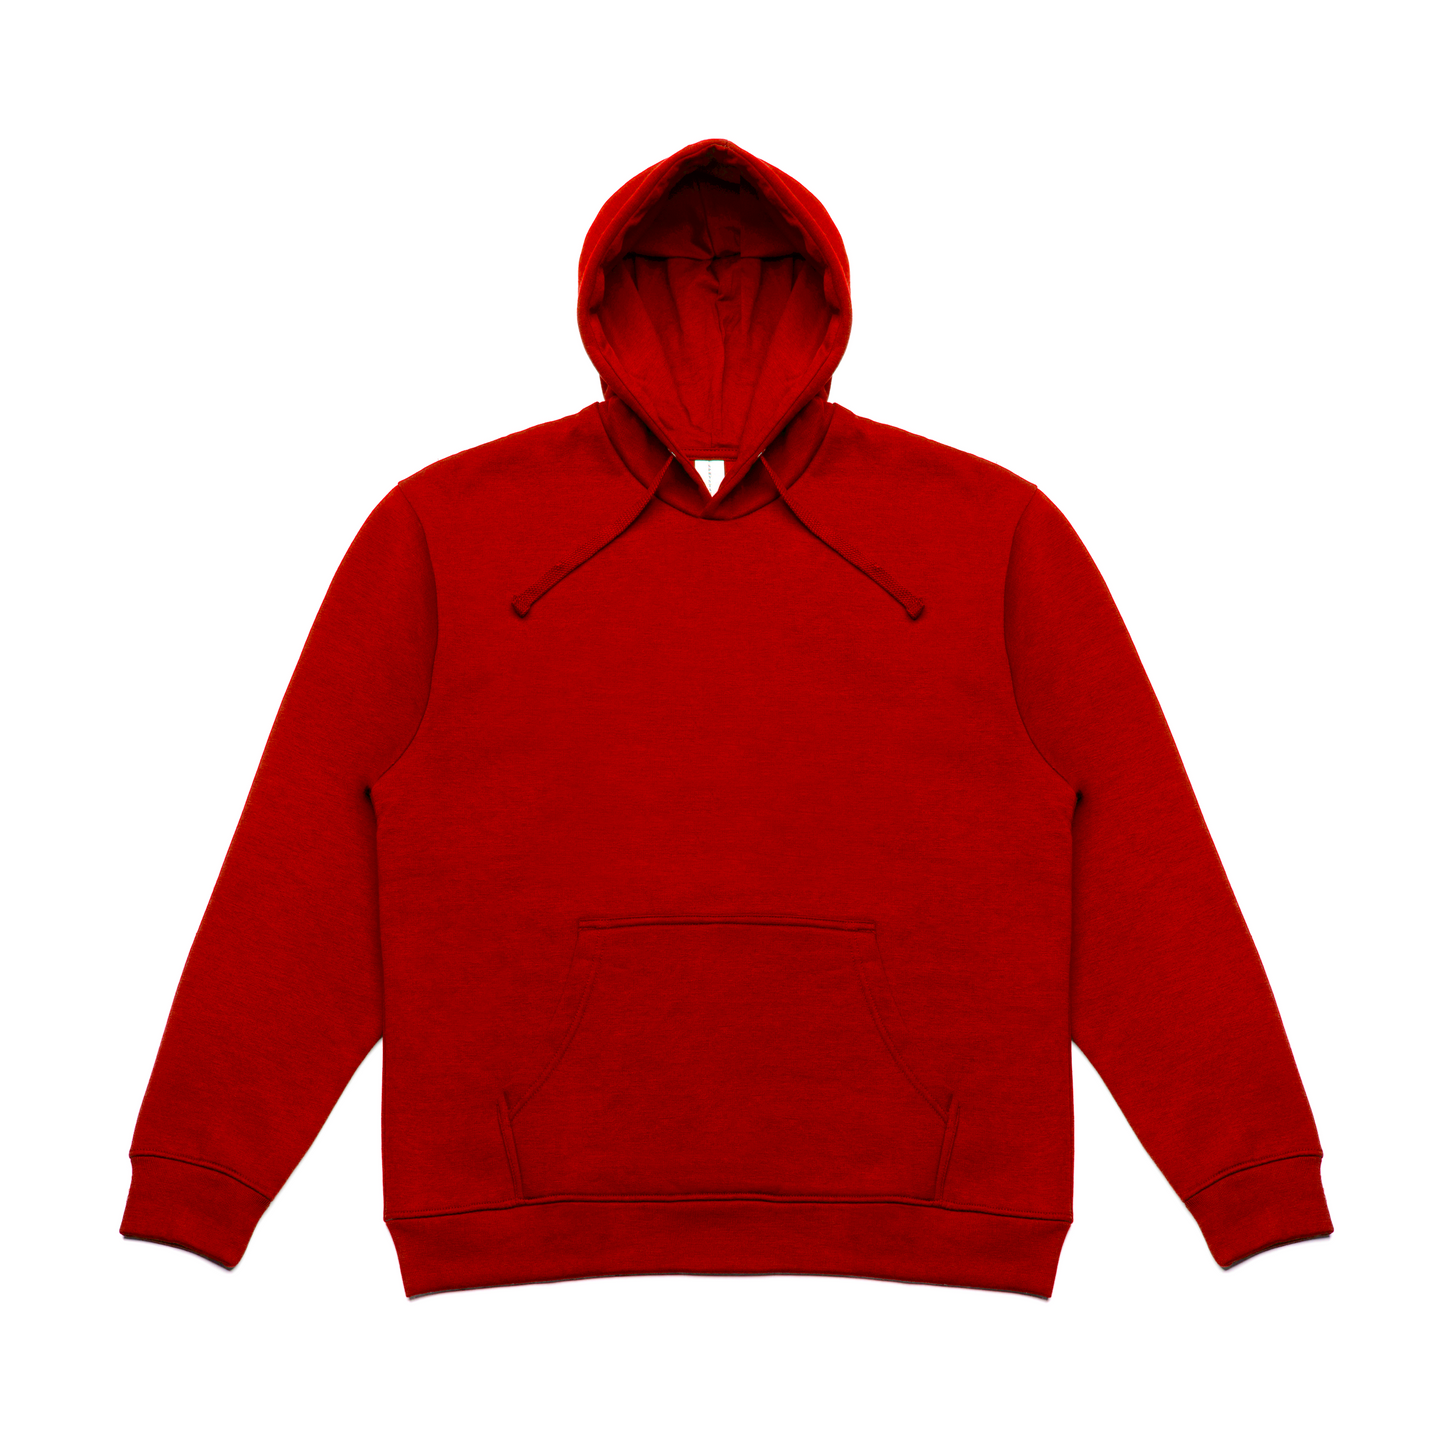 SS1024 Premium Pullover Hoodie - Red